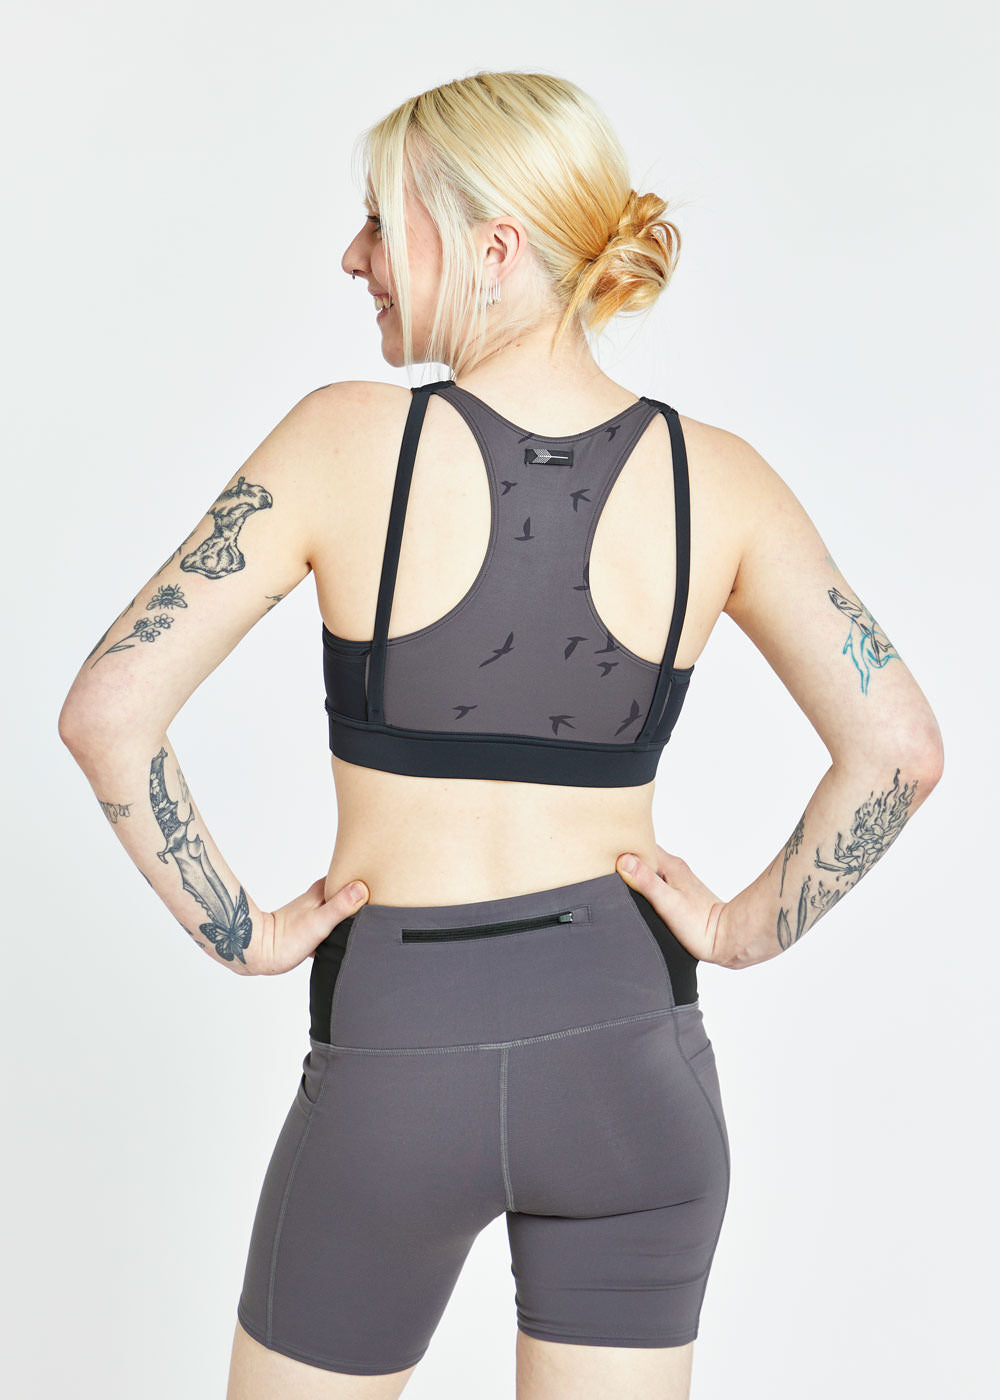 ⚡️Oiselle Pockito Bra⚡️, She has something to SMILE 😊 about! The Oiselle Pockito  Bra is beautiful, fits like a dream AND has pockets! Easily carry your  phone on your runs 🏃🏽‍♀️!